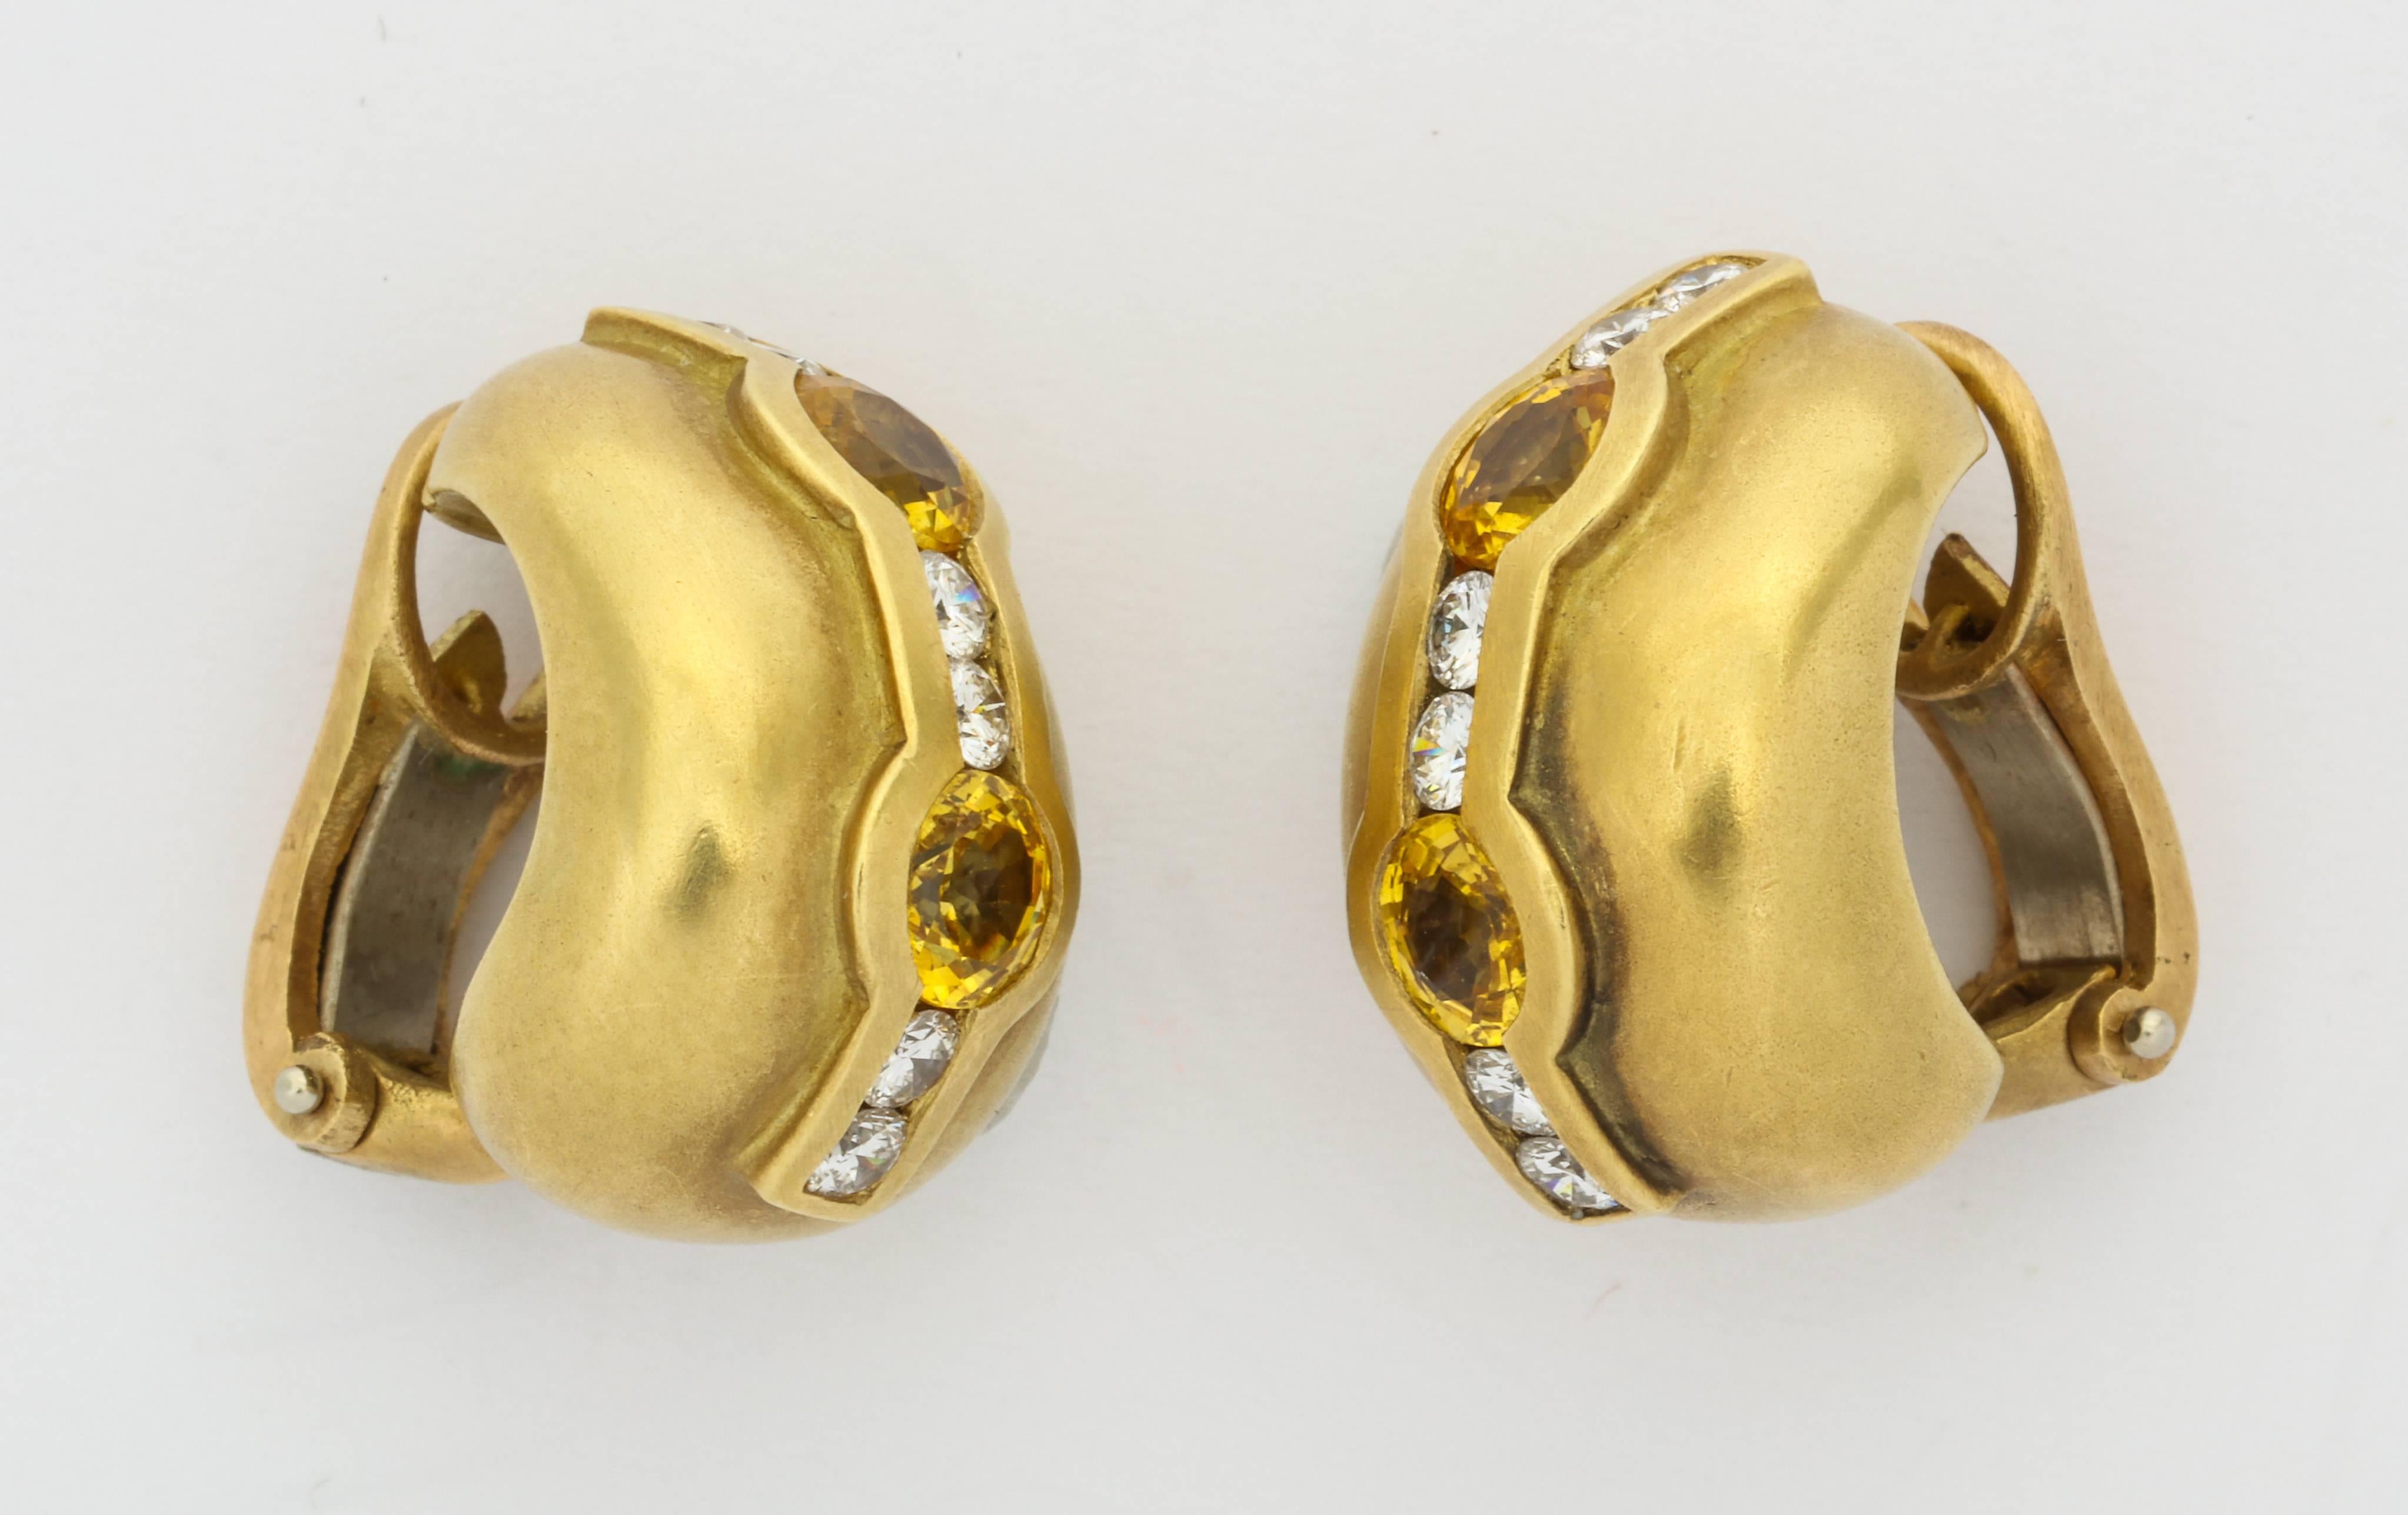 1997 Barry Kieselstein Cord Yellow and White Diamond Gold Ear Clips 1